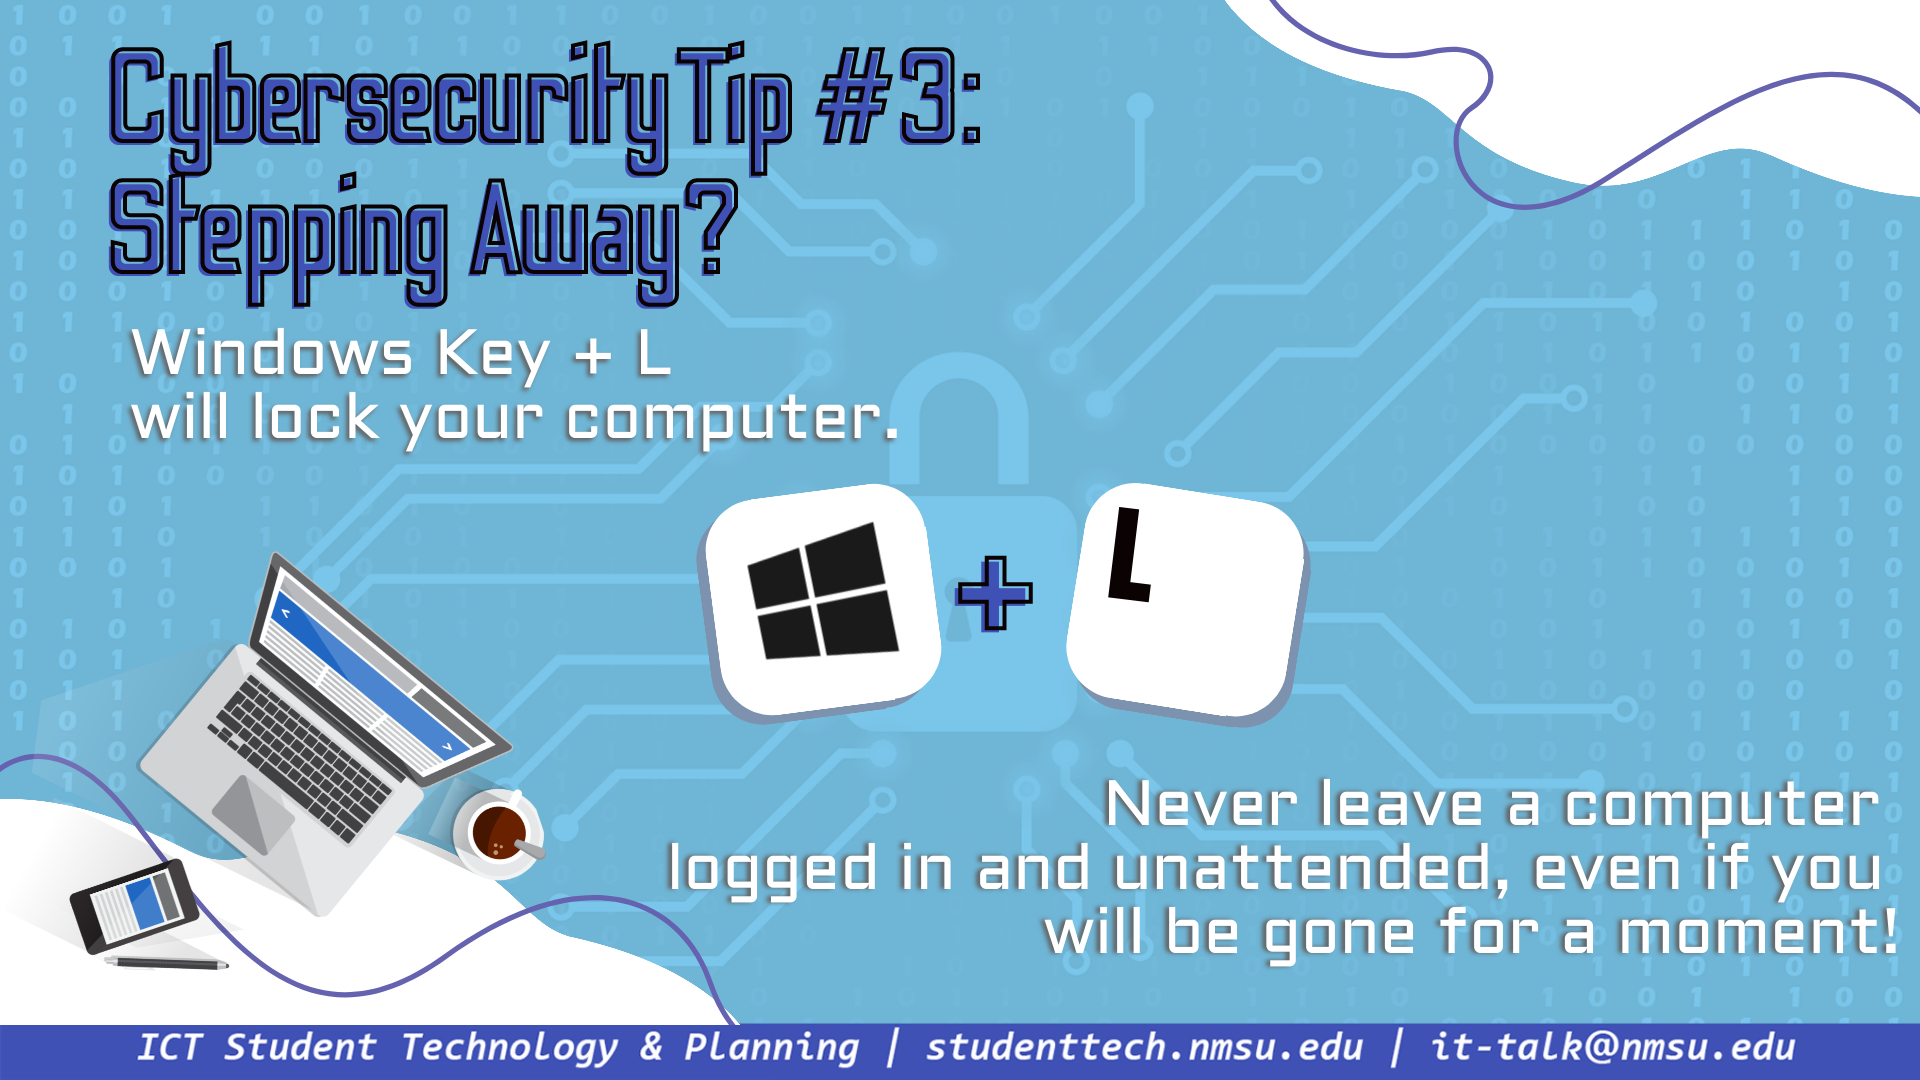 Windows Key + L will lock your computer. Never leave a computer logged in and unattended, even if you will be gone only a moment!